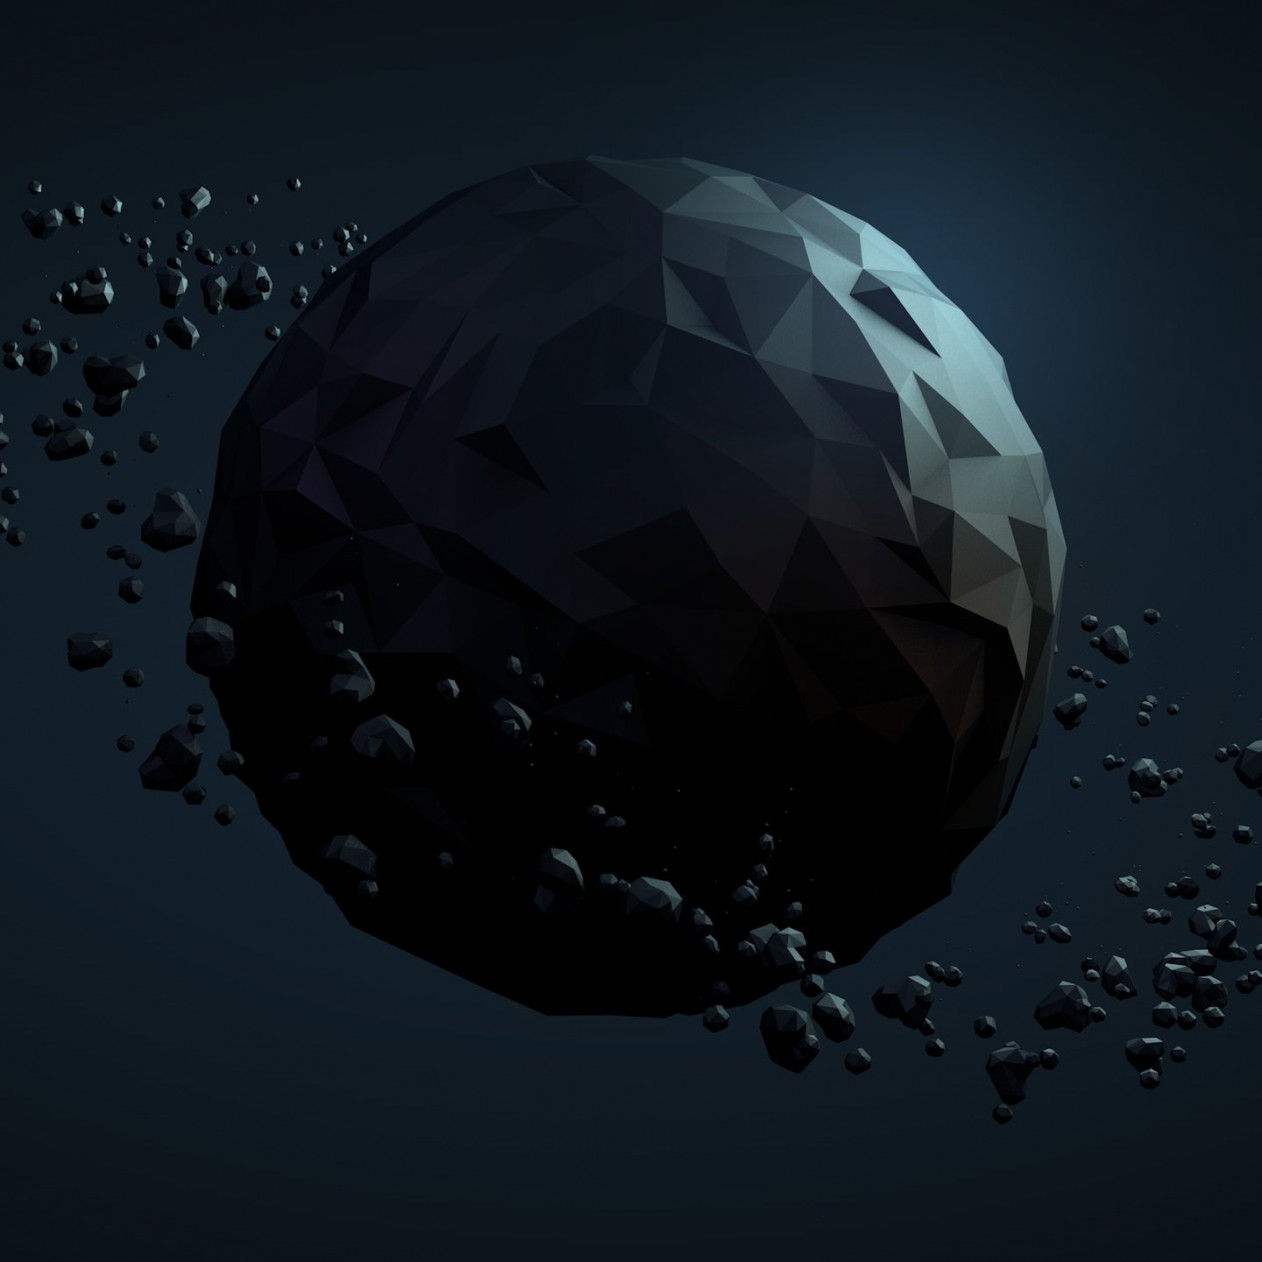 Low Poly Planet Wallpaper for Apple iPad mini